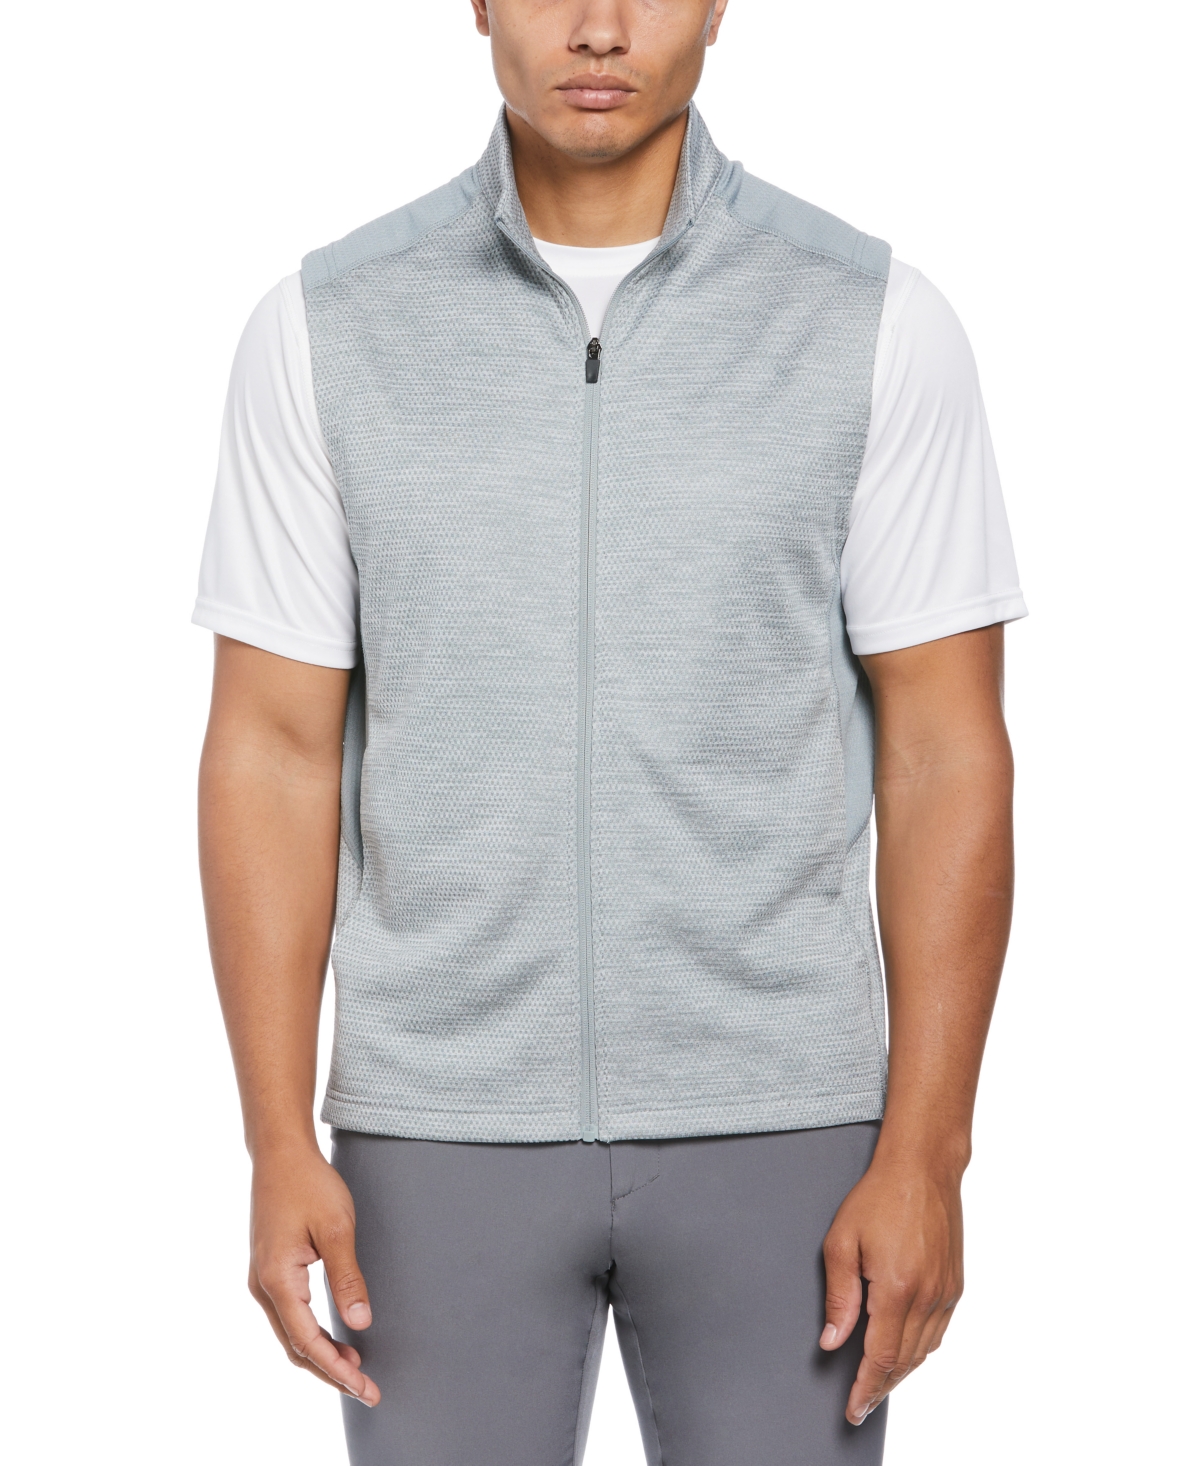 Men's Two-Tone Space-Dyed Full-Zip Golf Vest - Quarry Heather